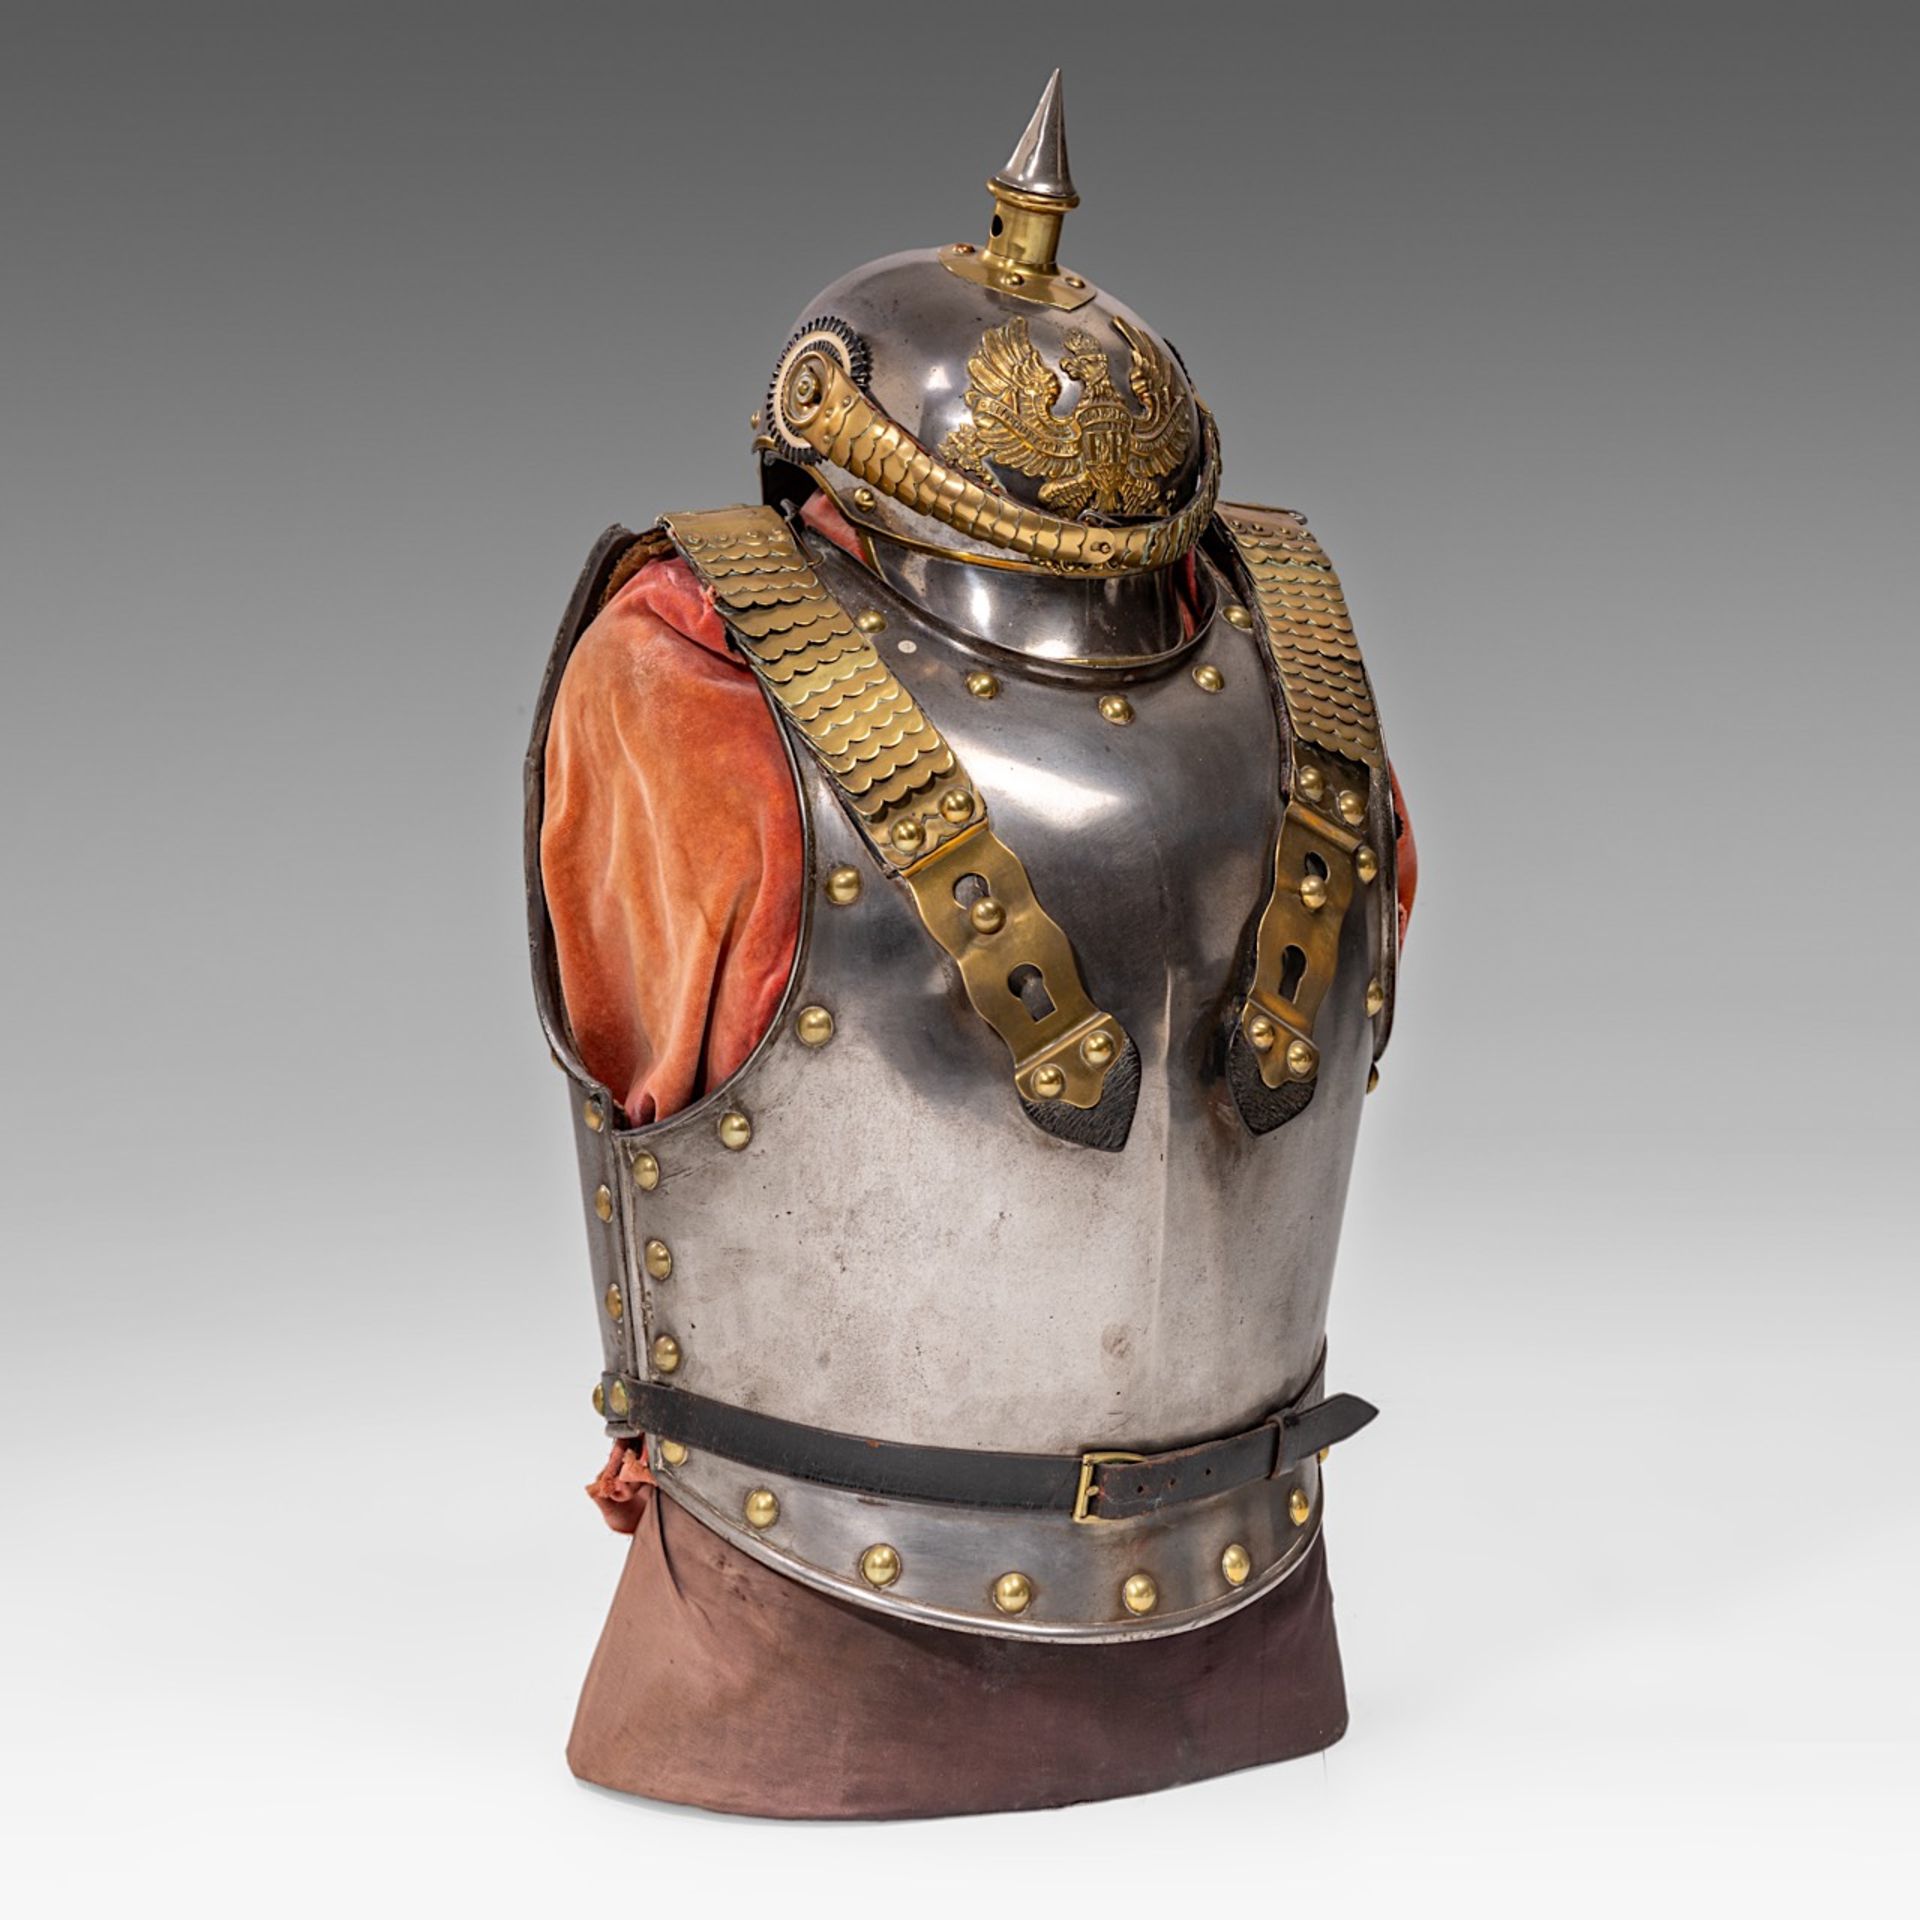 Cuirass and helmet, metal and gilded brass, 19thC., 68 x 30 x 36 cm. (26.7 x 11.8 x 14.1 in.) - Image 7 of 8